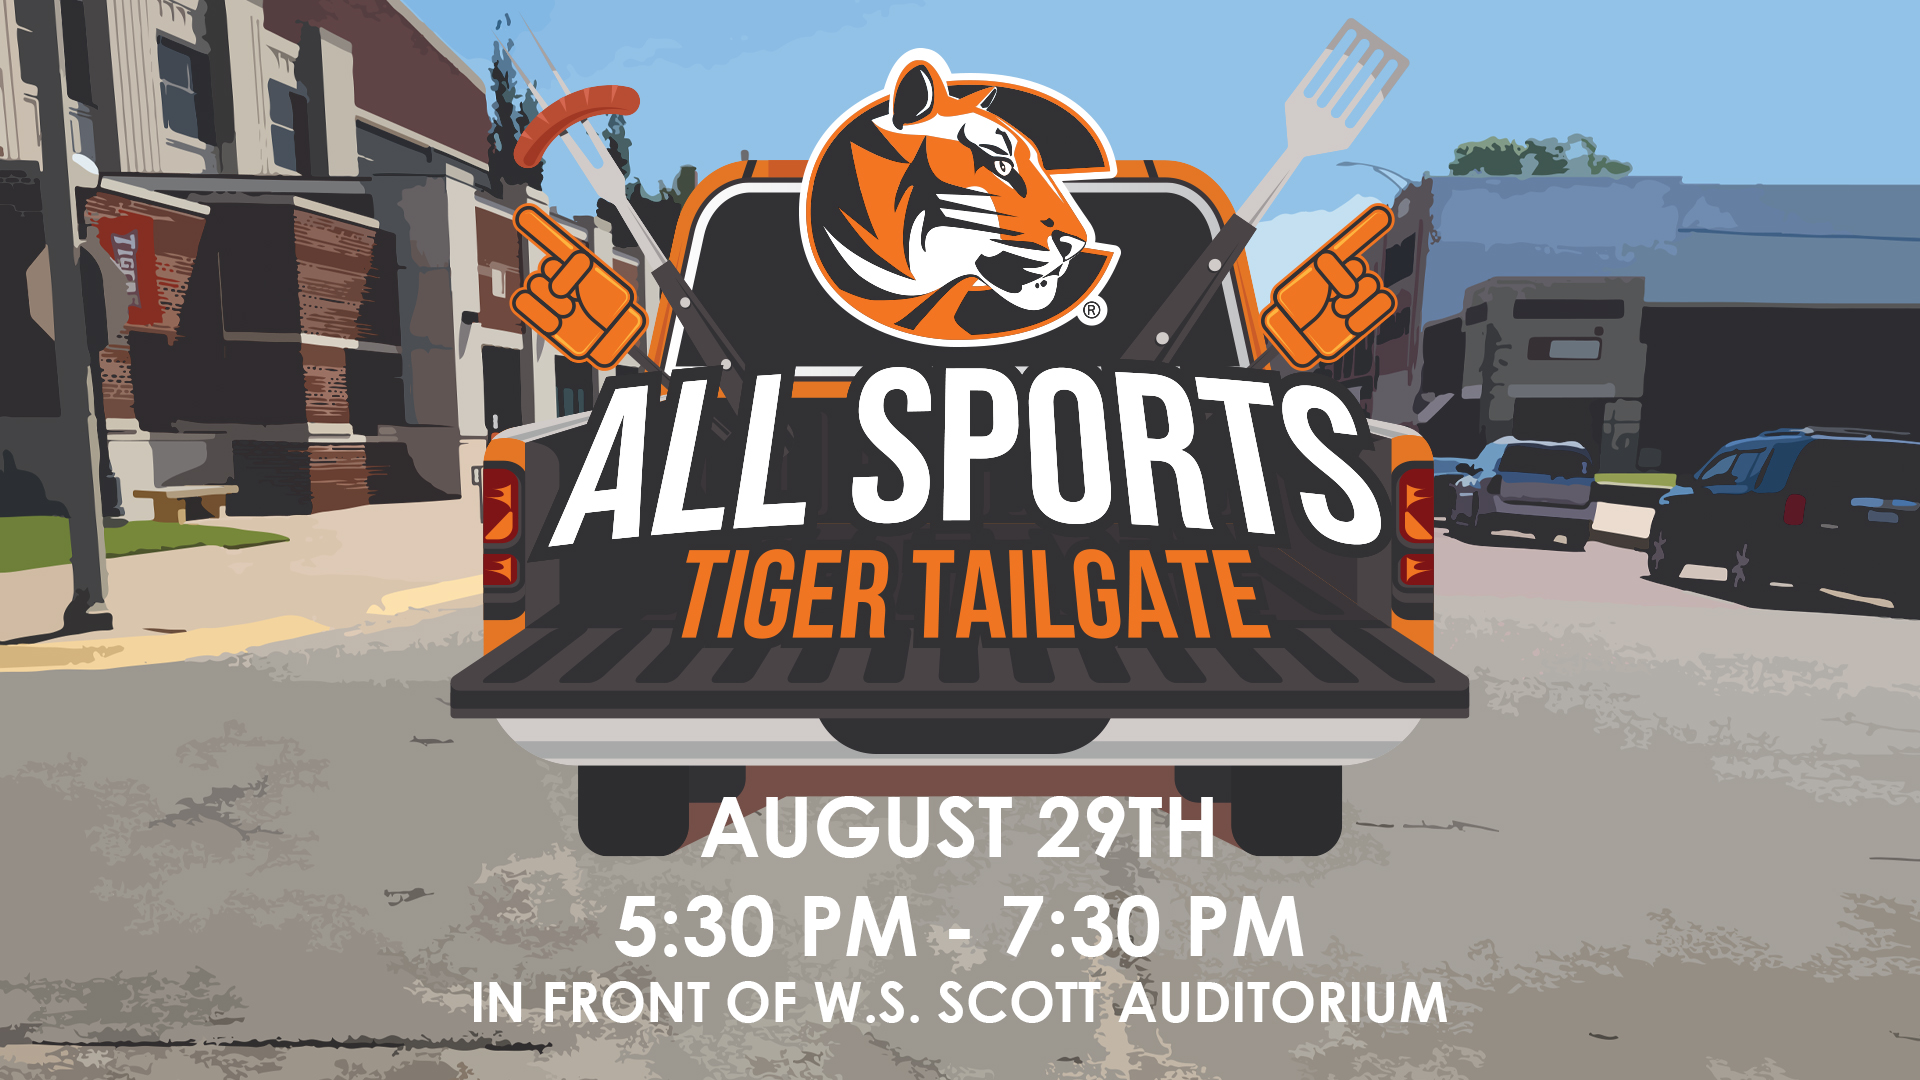 All Sports Tiger Tailgate is to be held at Cowley College on August 29